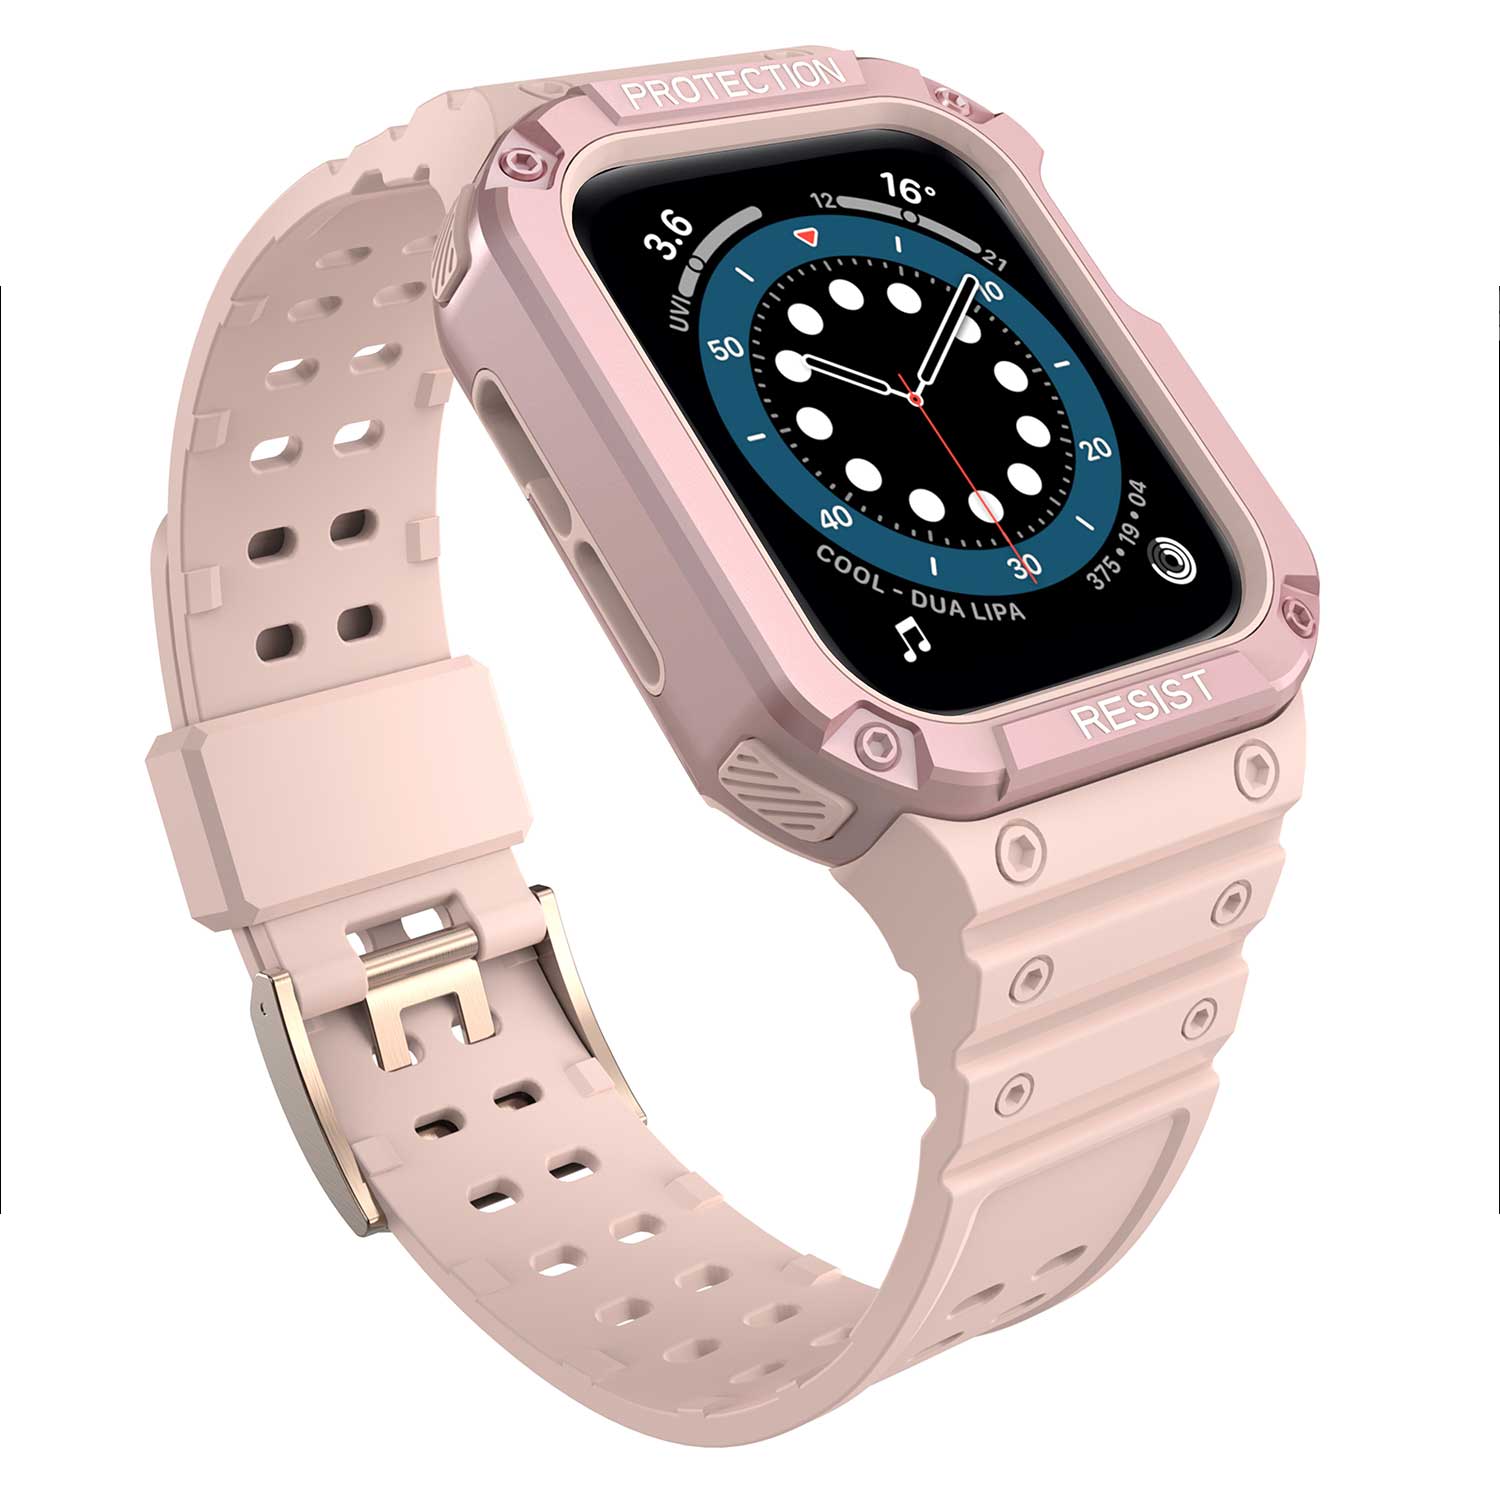 Tough On Apple Watch Band with Case Series 1 / 2 / 3 38mm Rugged Protection Pink/Pink